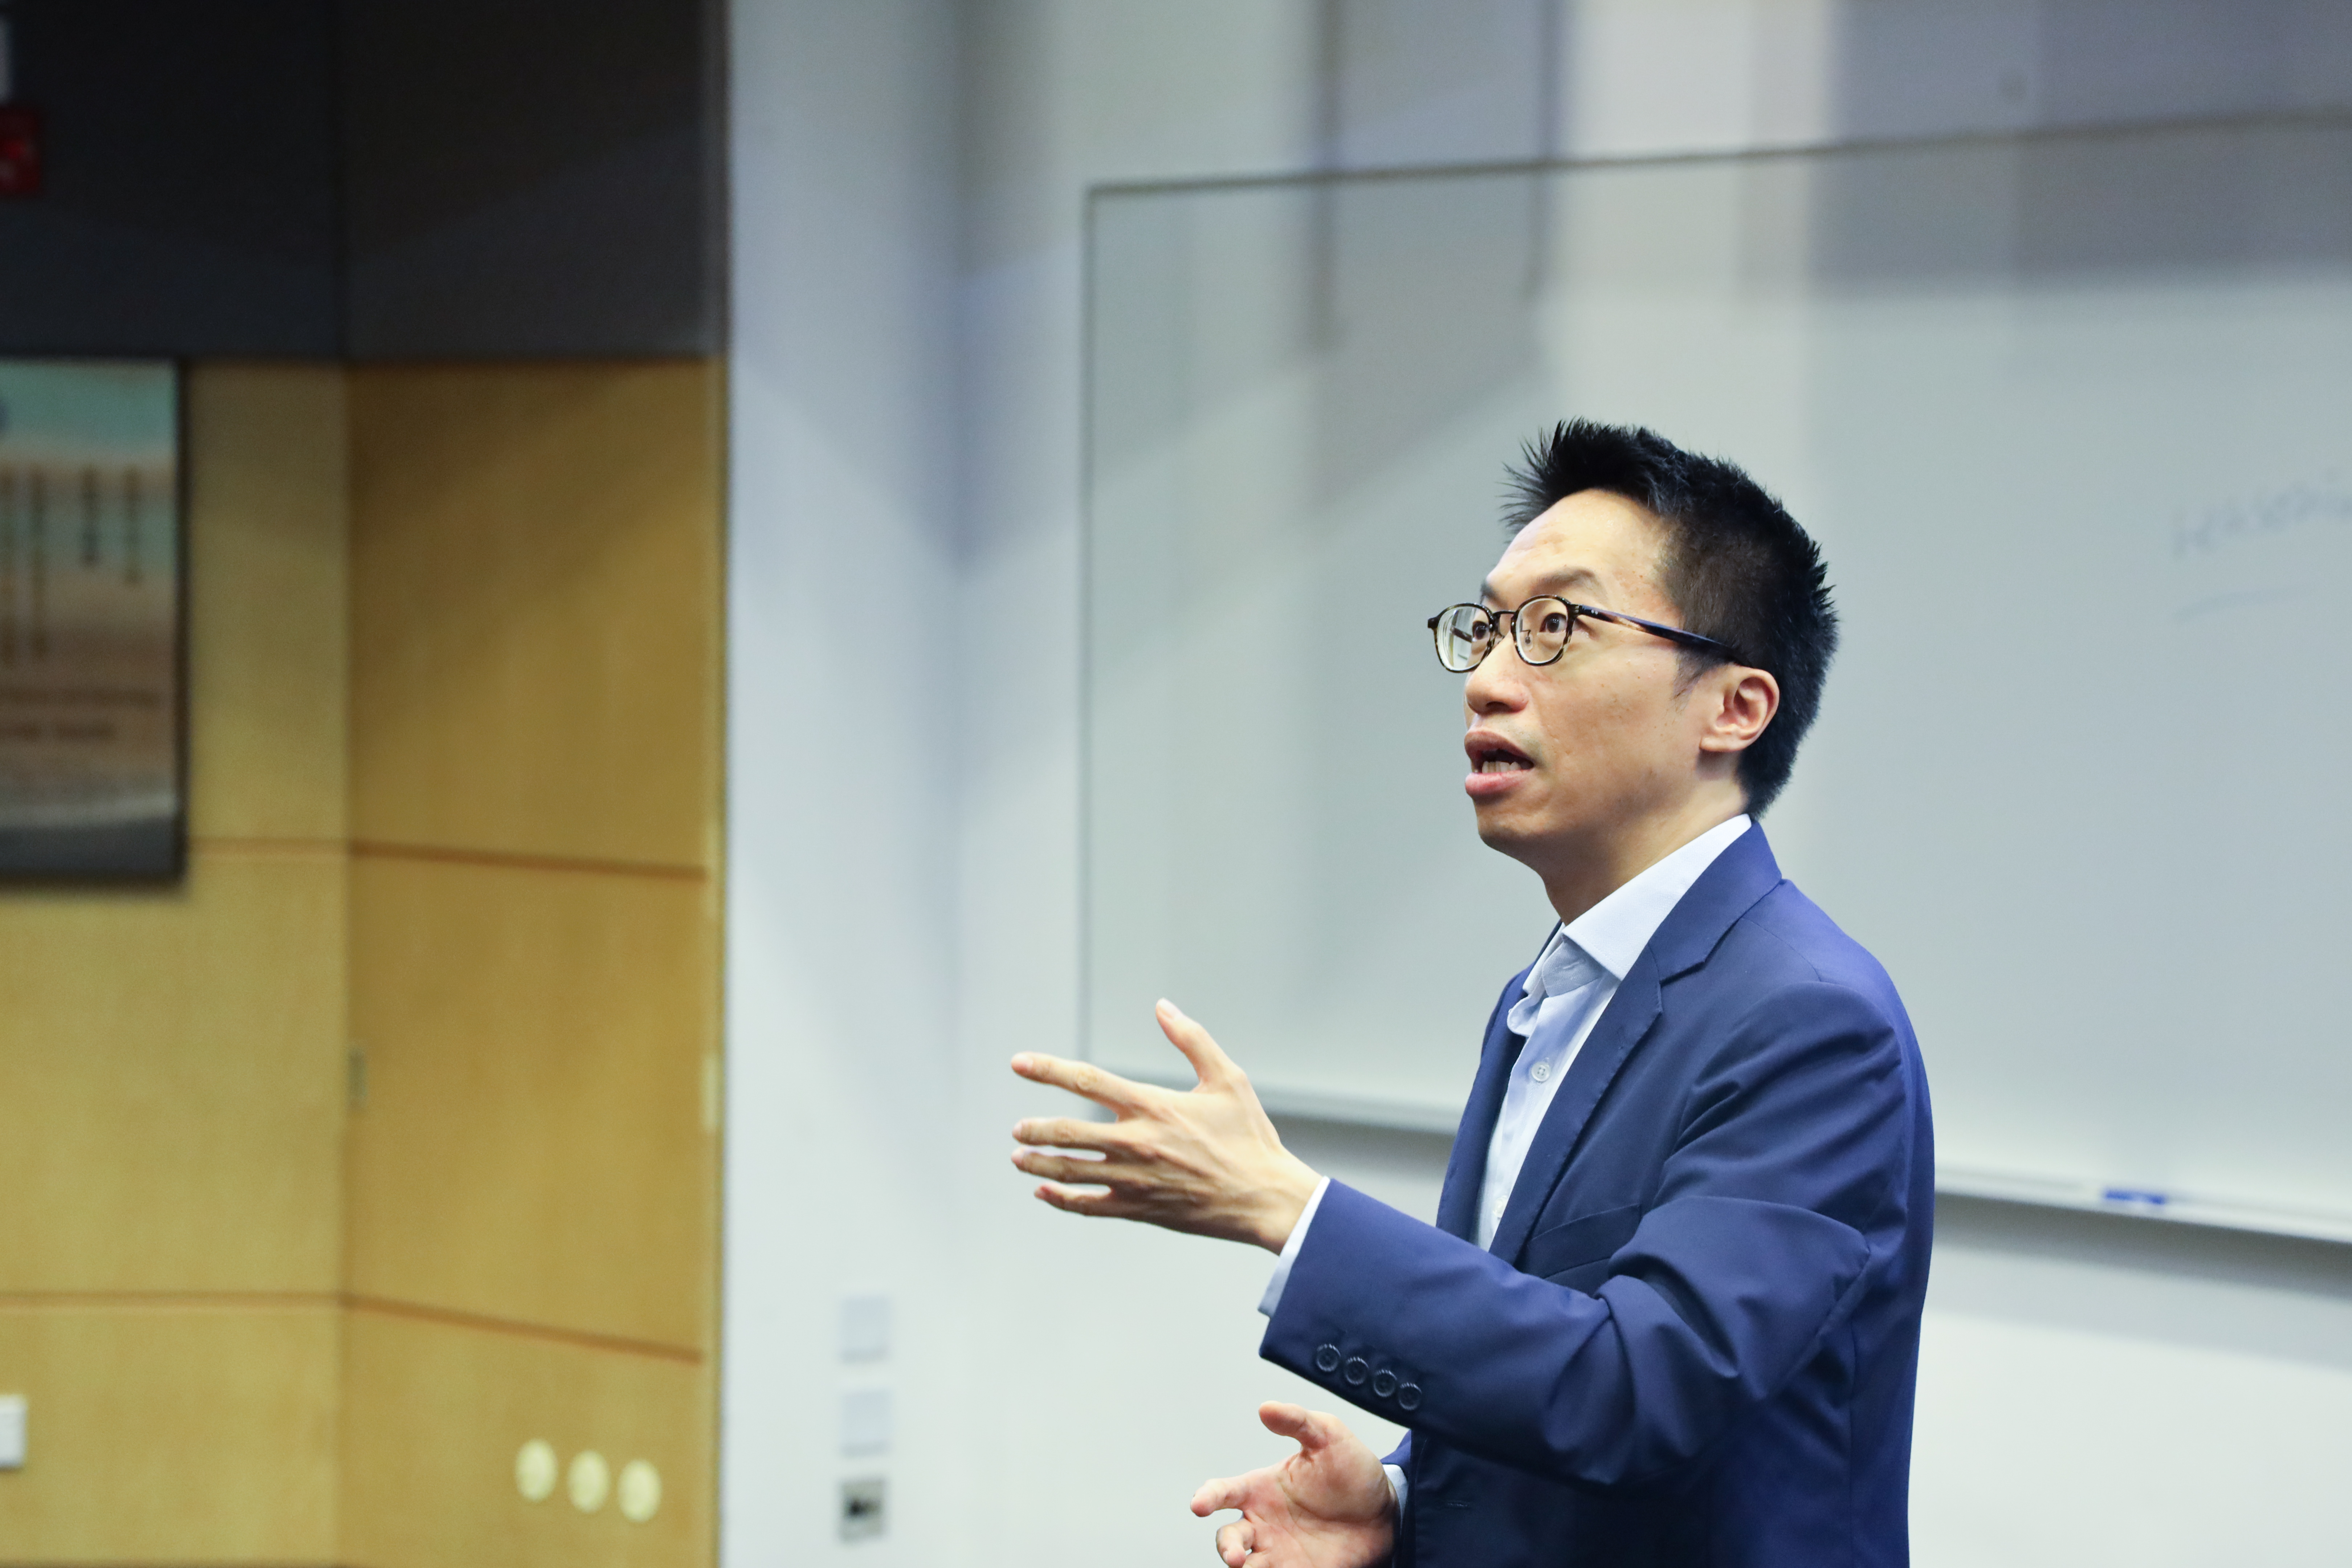 HKUST Professor James Wong giving a lecture